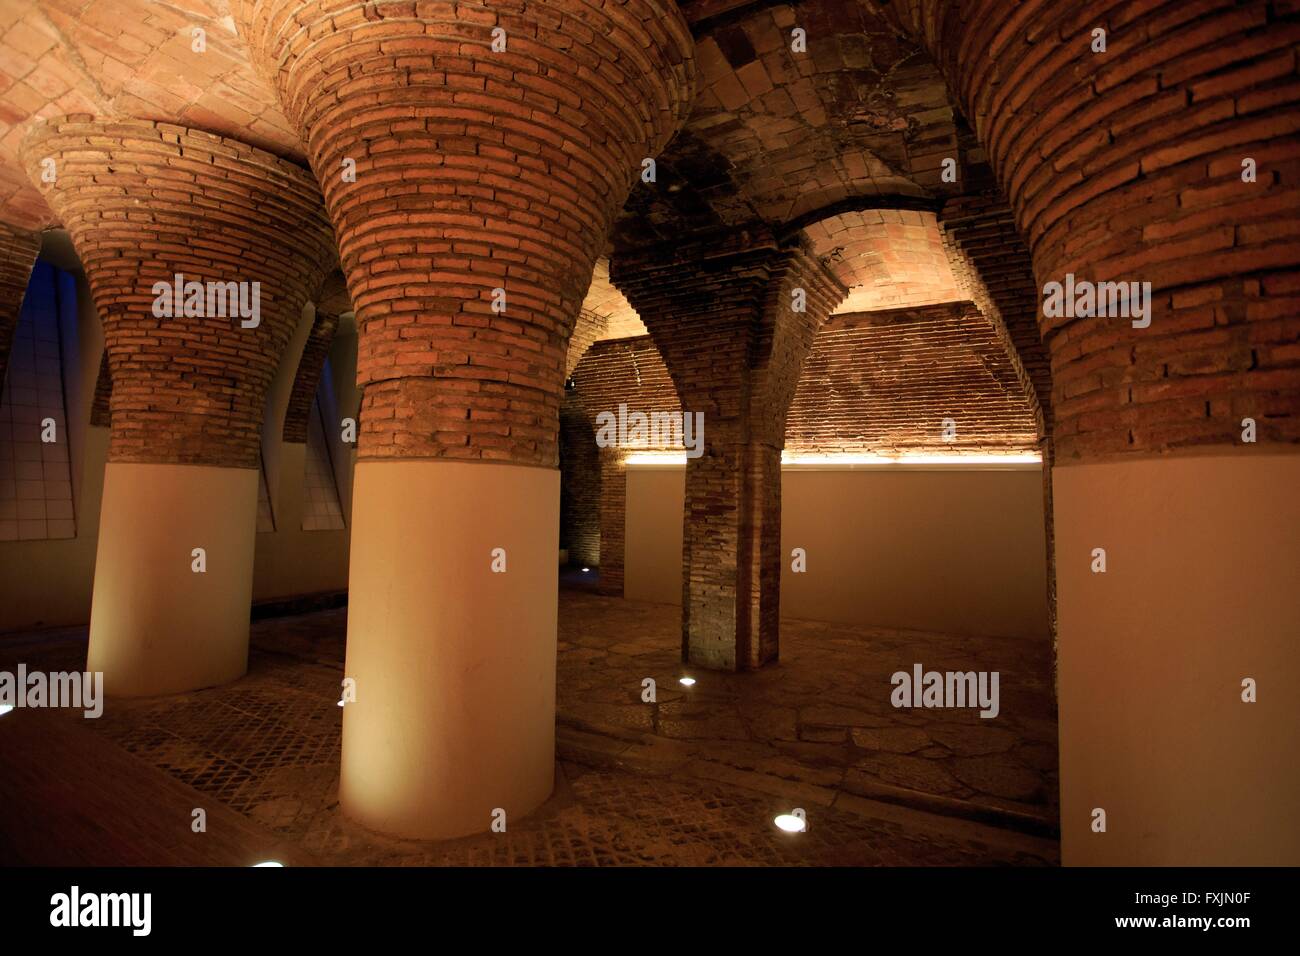 The underground horse stables of Palau Guell, Barcelona, Spain Stock Photo